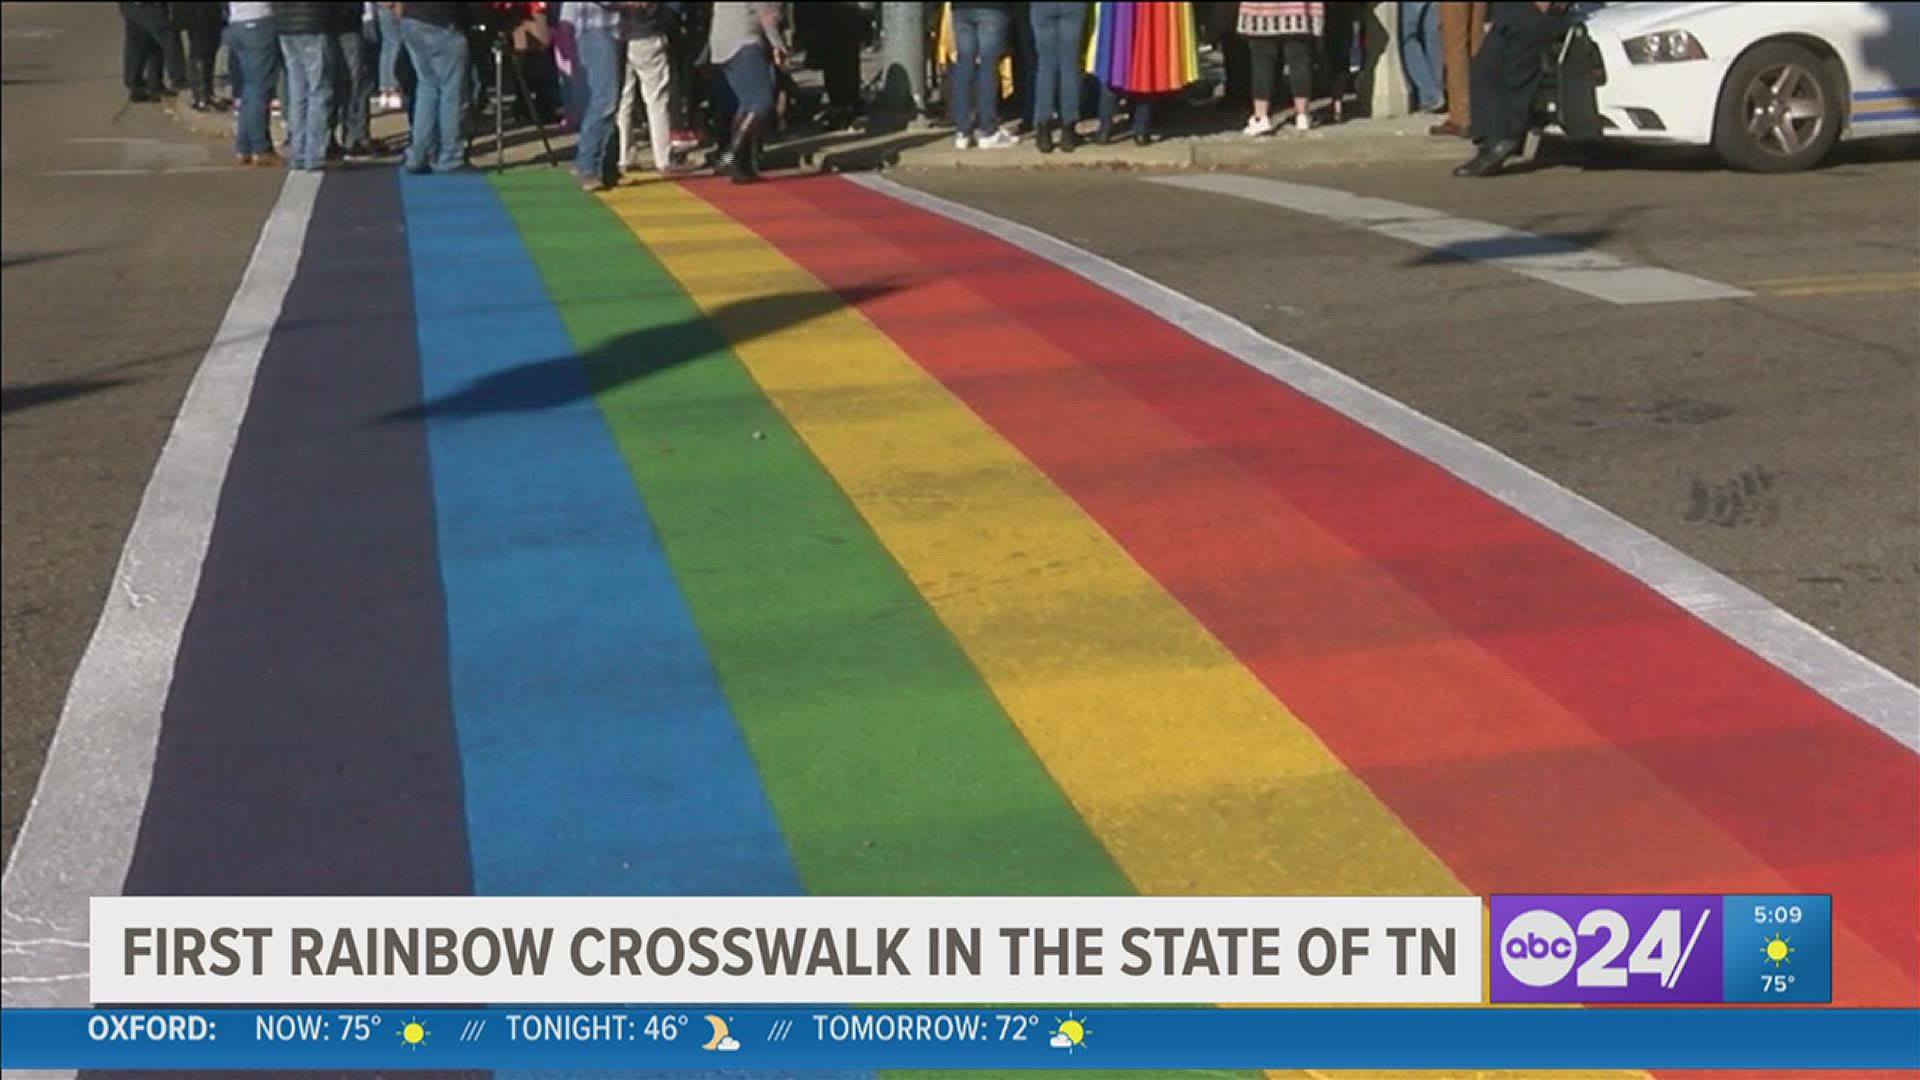 Memphis City Beautiful Commissioner and founder of the Rainbow Crosswalk Project in Memphis Jerred Price said this is the first rainbow crosswalk in Tennessee.